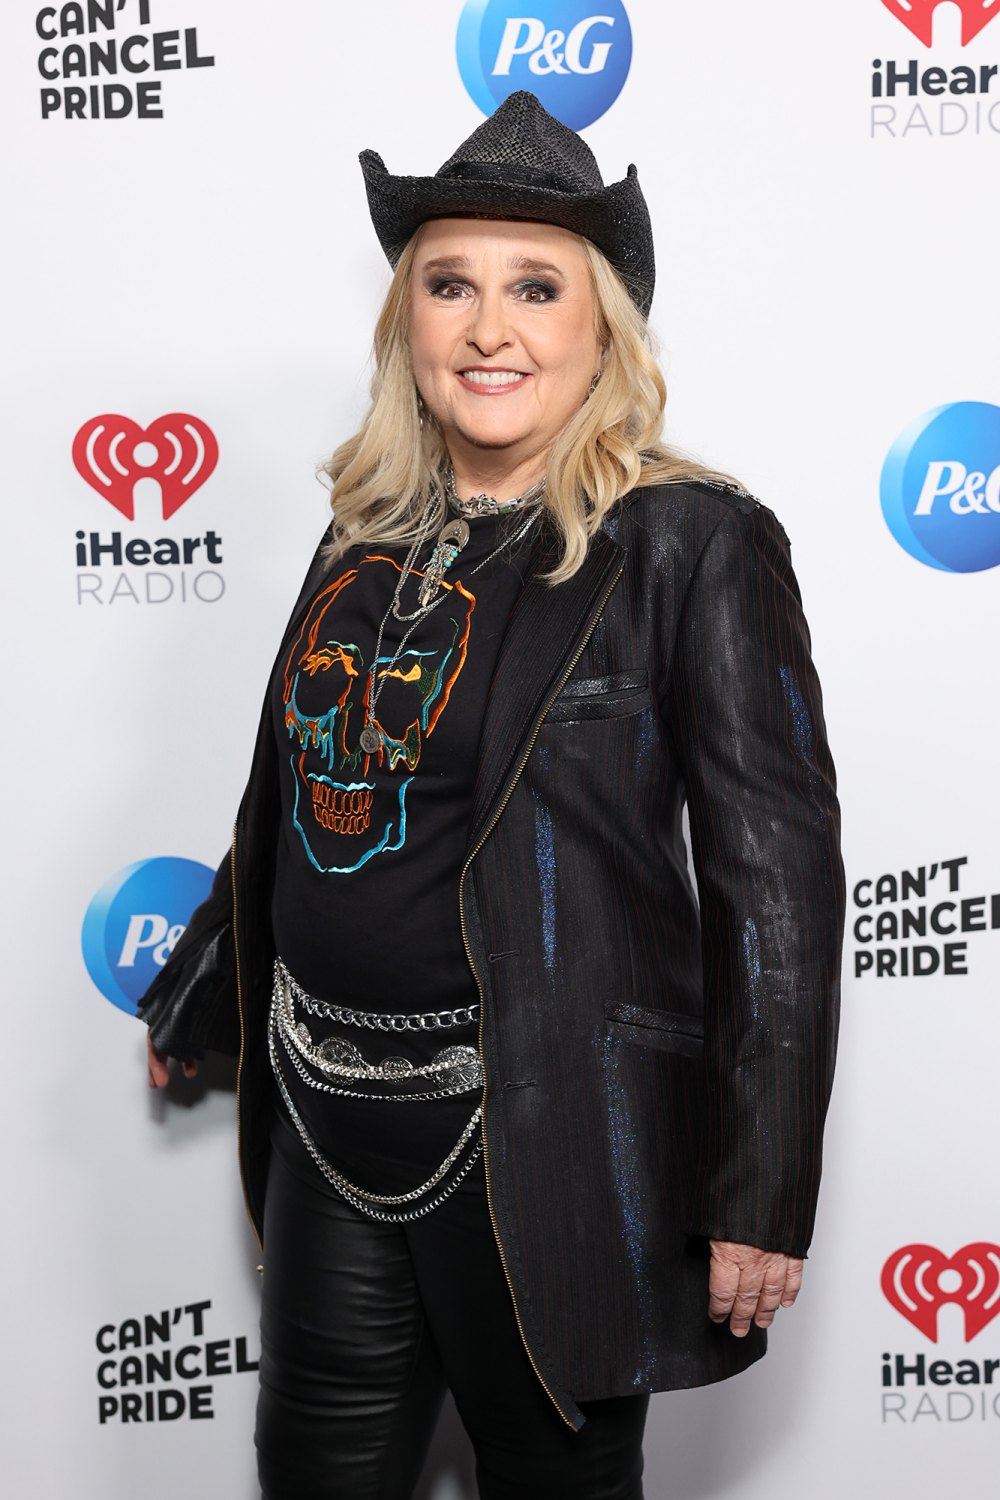 Melissa Etheridge Reflects on Coming Out During Bill Clinton's Inauguration: 'Bam, There It Was'